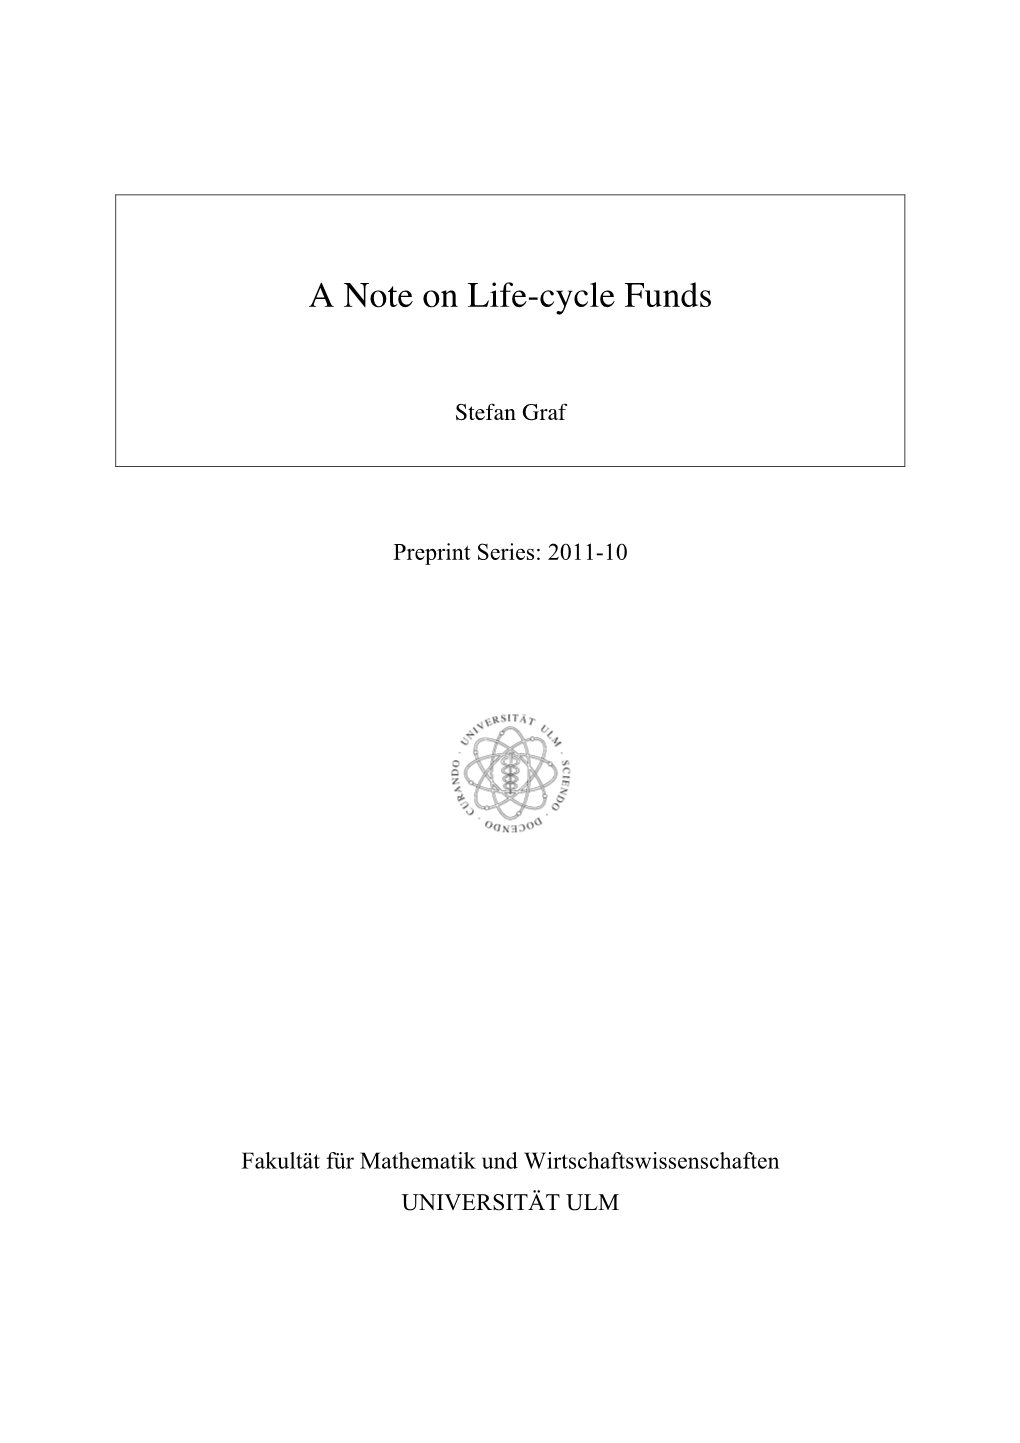 2011-07 a Note on Life-Cycle Funds